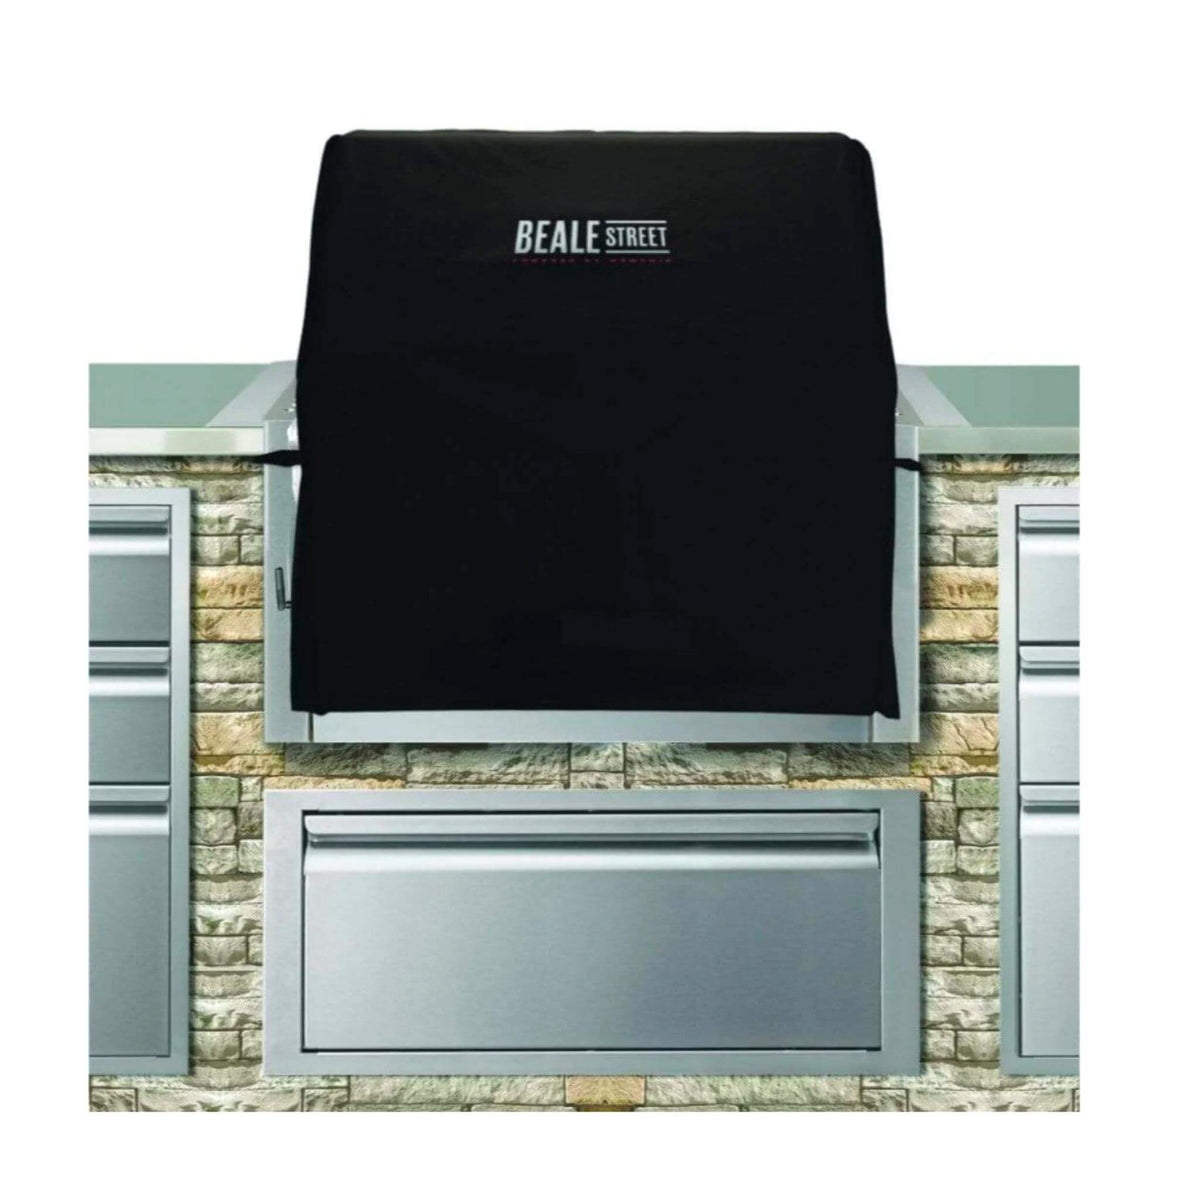 Memphis Grills Beale Street Built-in Cover